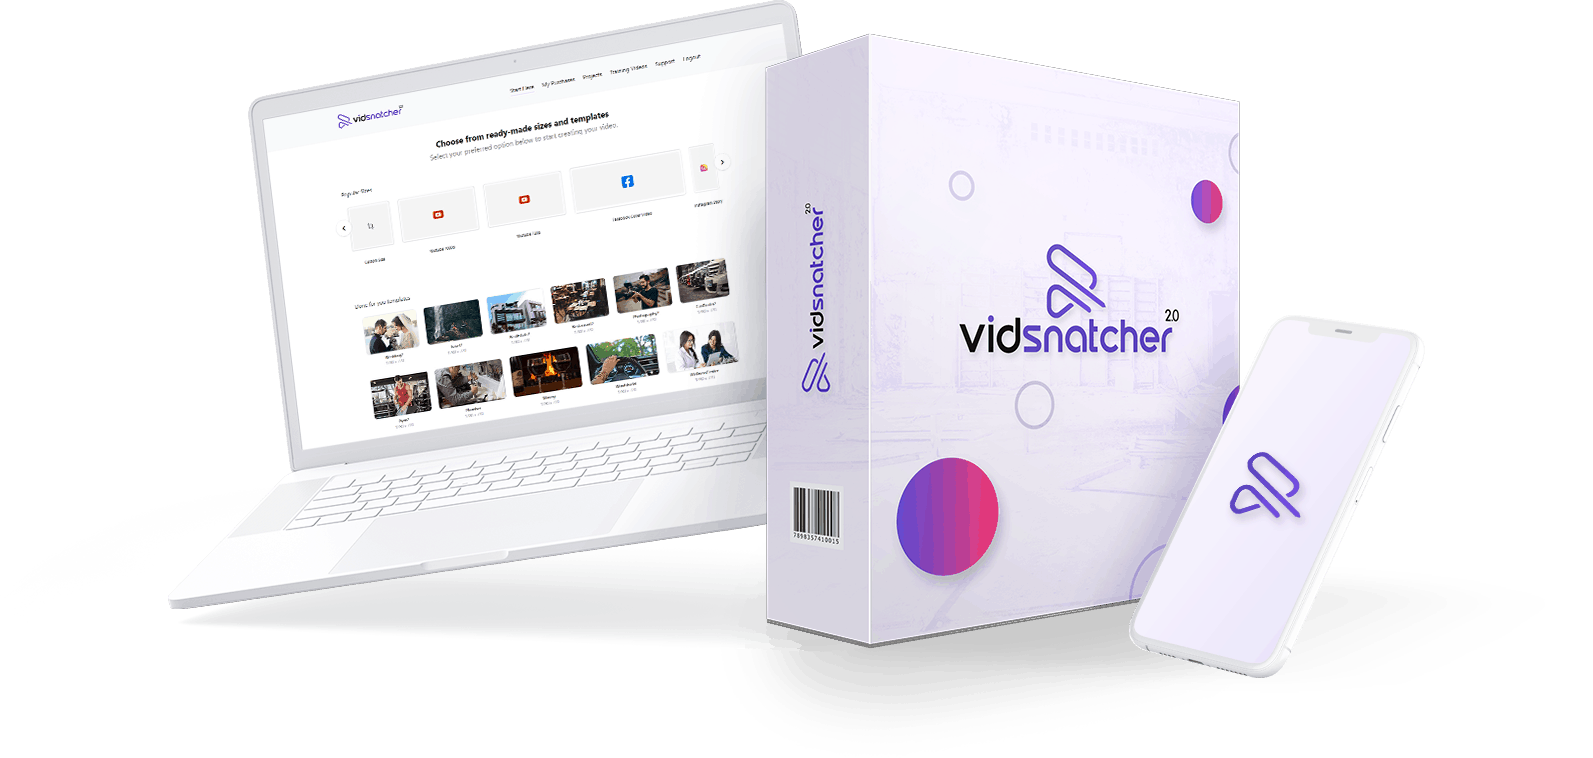 VidSnatcher 2 Commercial Video Editor and Creator Tools